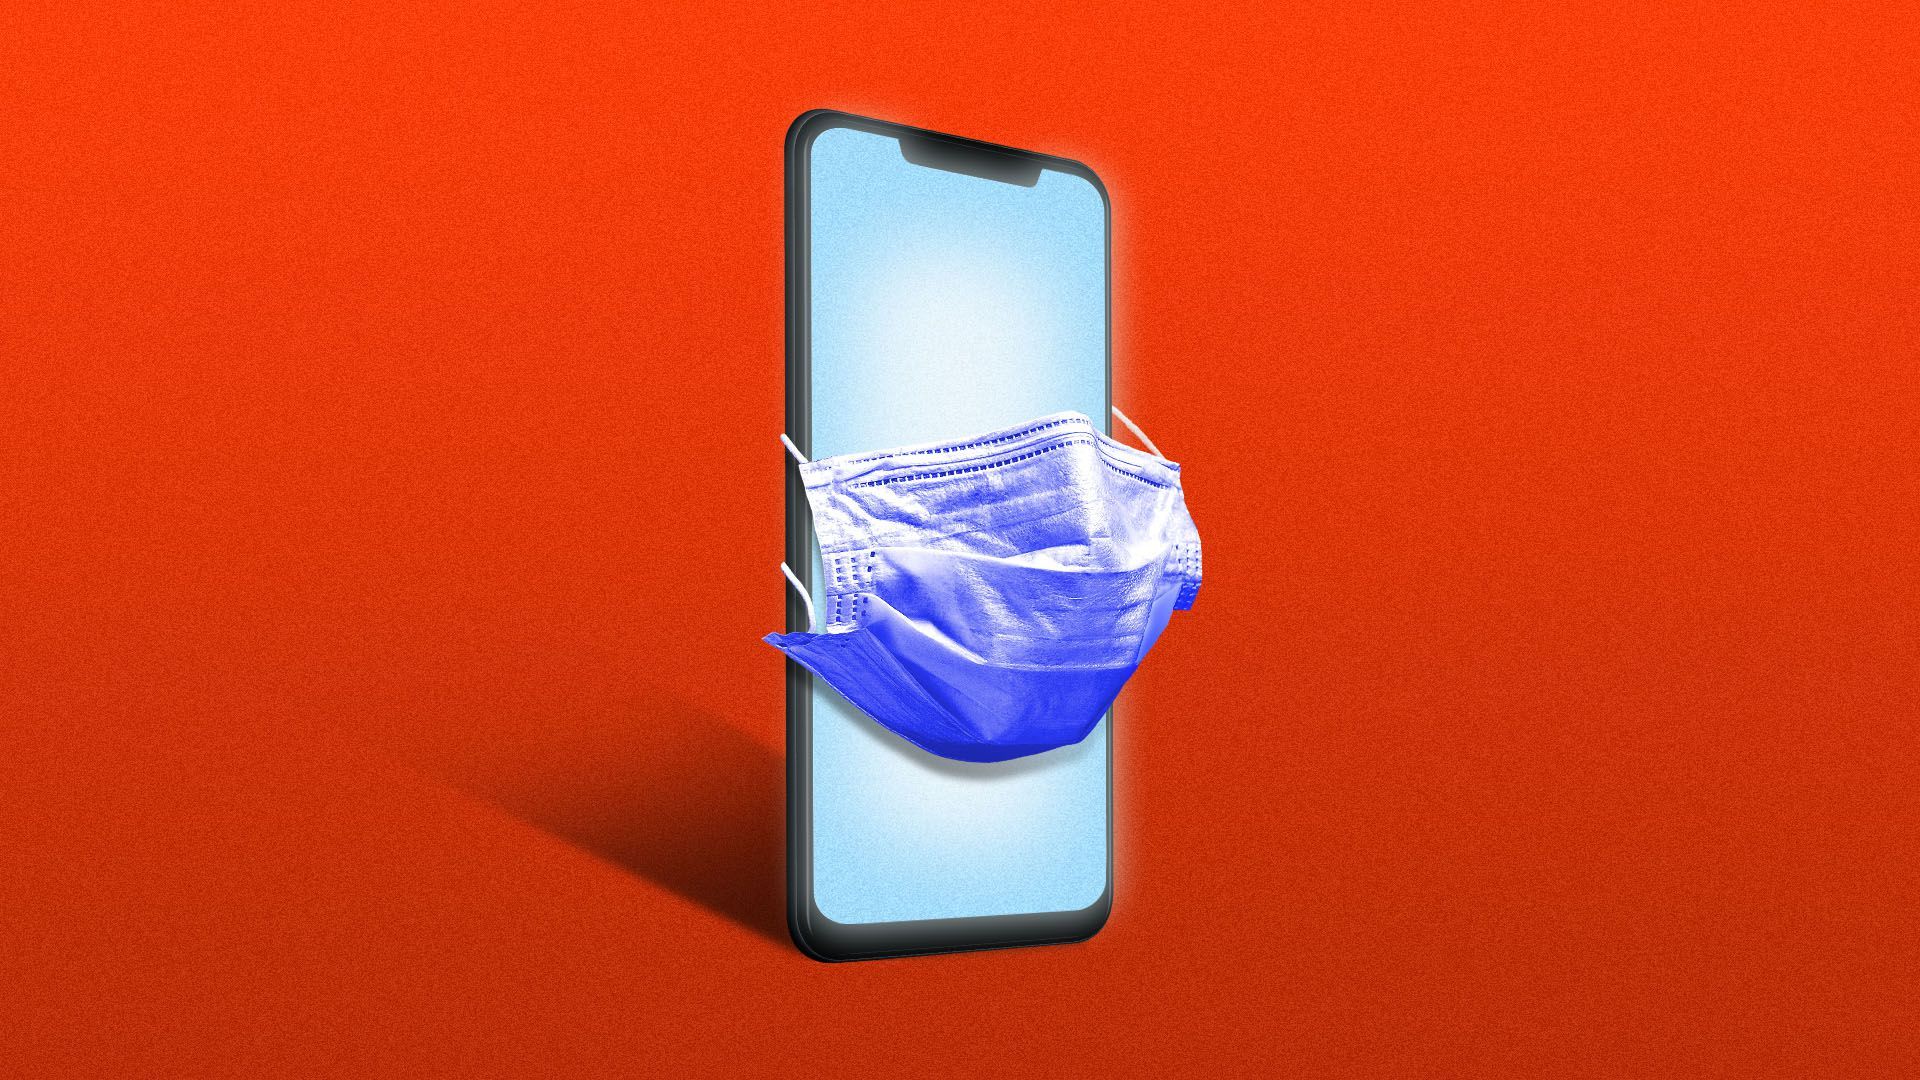 Illustration of a cell phone wearing a medical mask